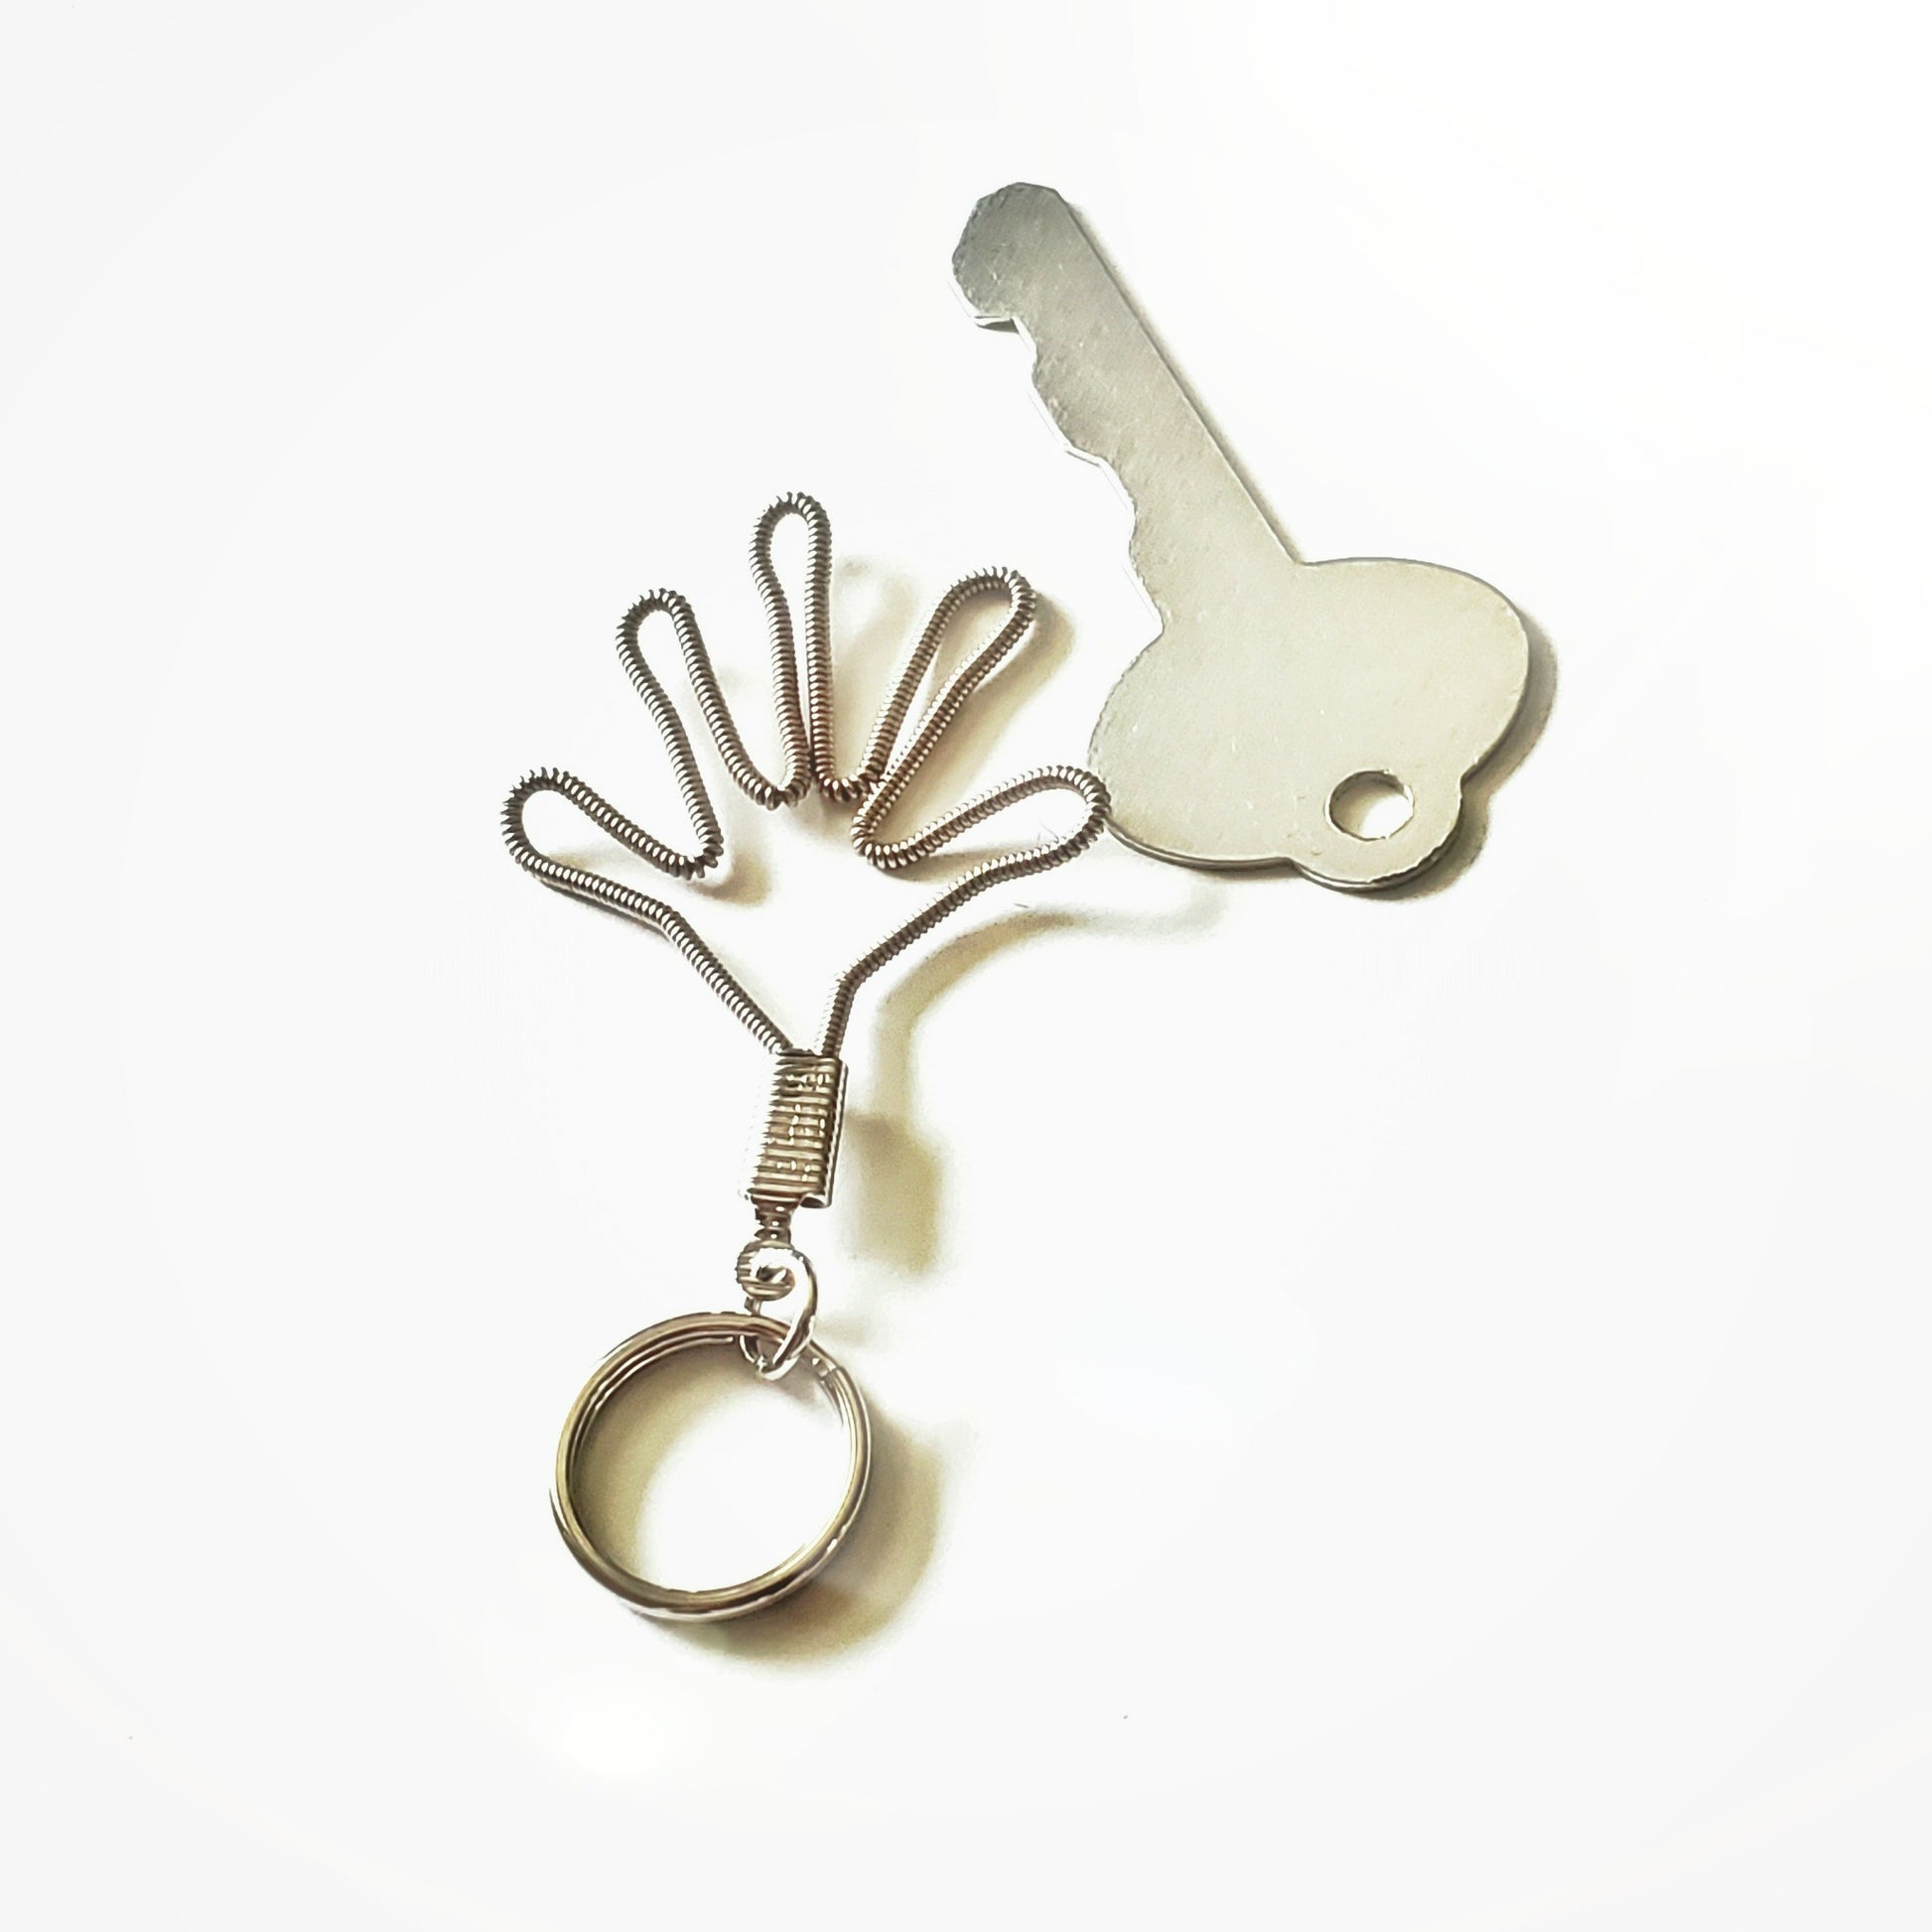 a keychain made from an upcycled guitar string shaped like a hand - beside it is a silver key- white background